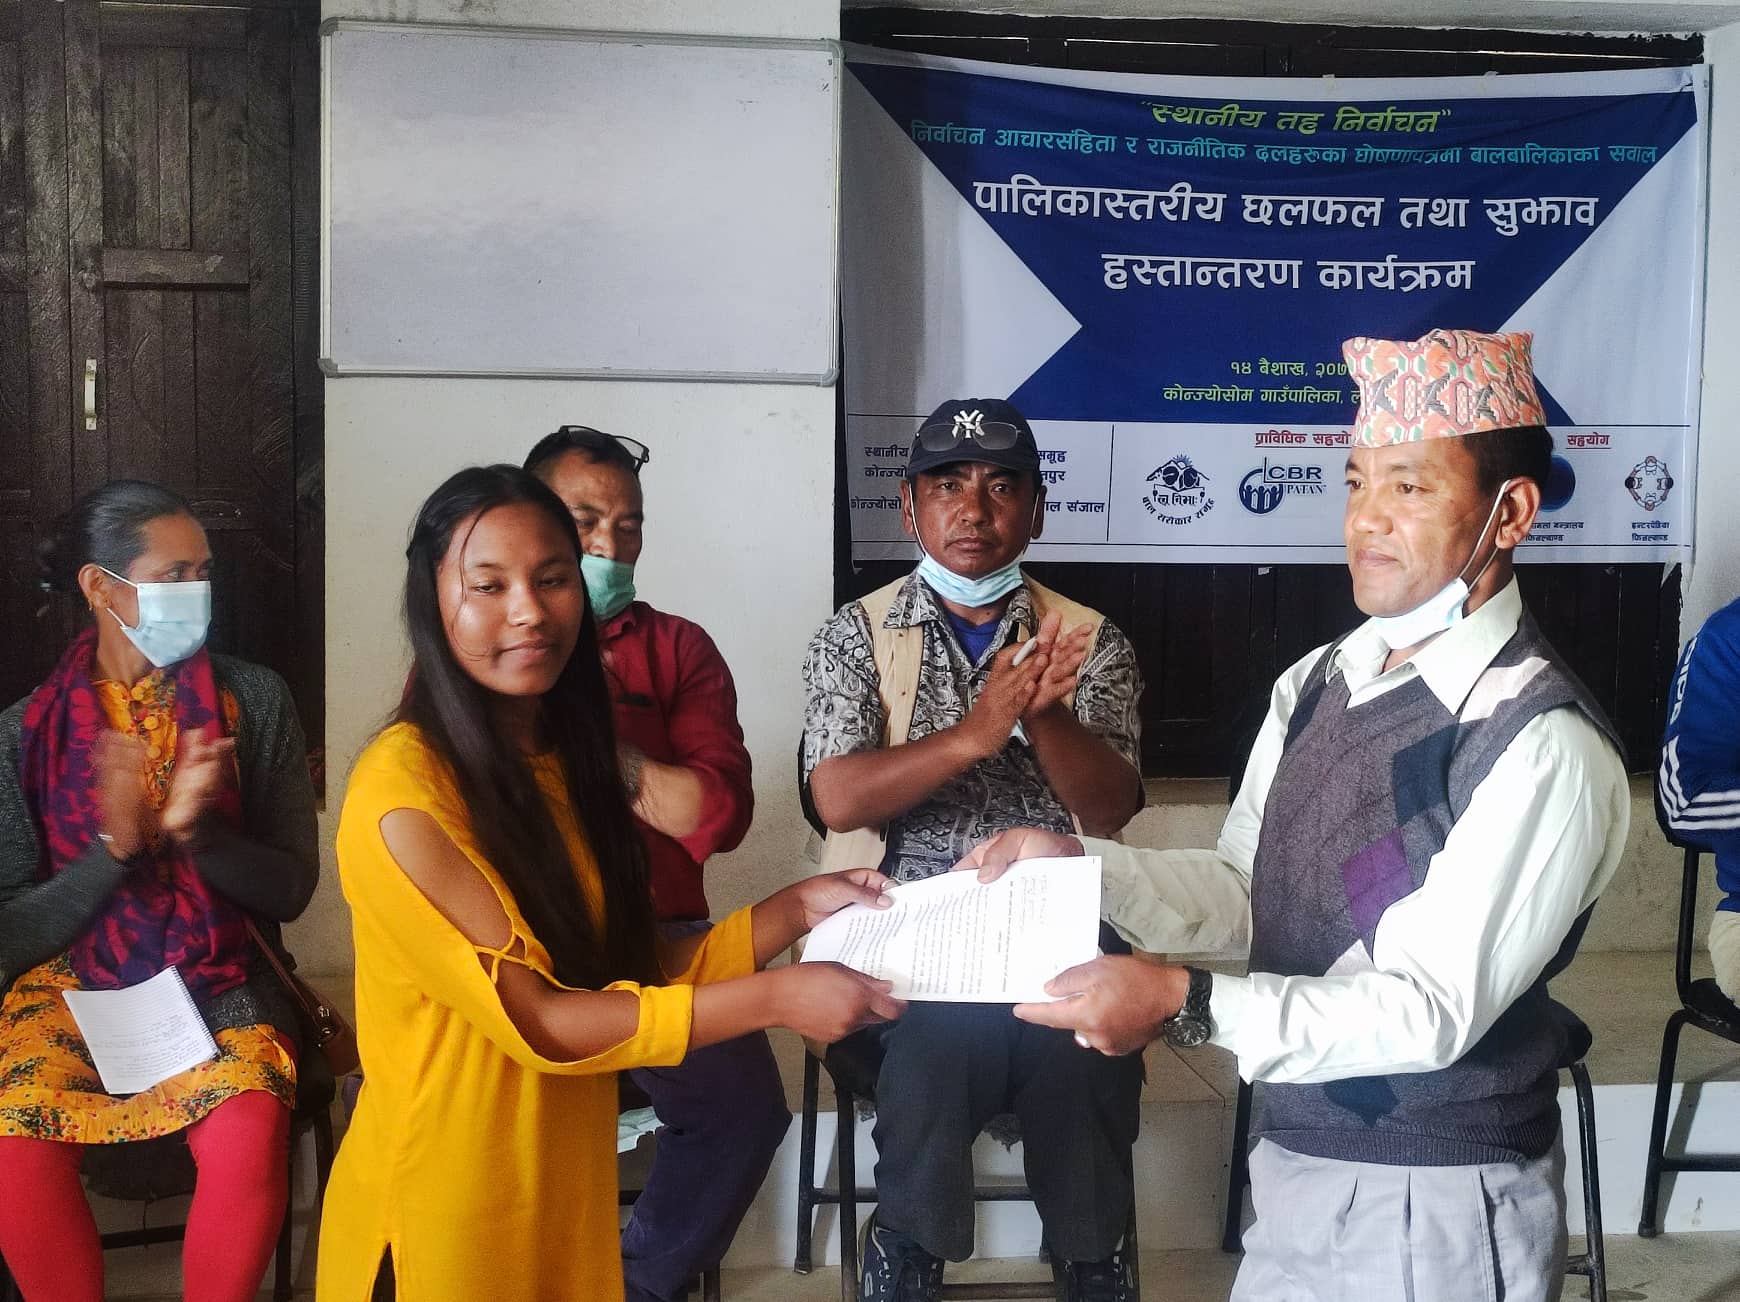 Child representatives of Konjyosom rural municipality hand over a memorandum to politicians, ahead of local elections, in Lalitpur, on Wednesday, April 27, 2022. Photo: Yuwalaya